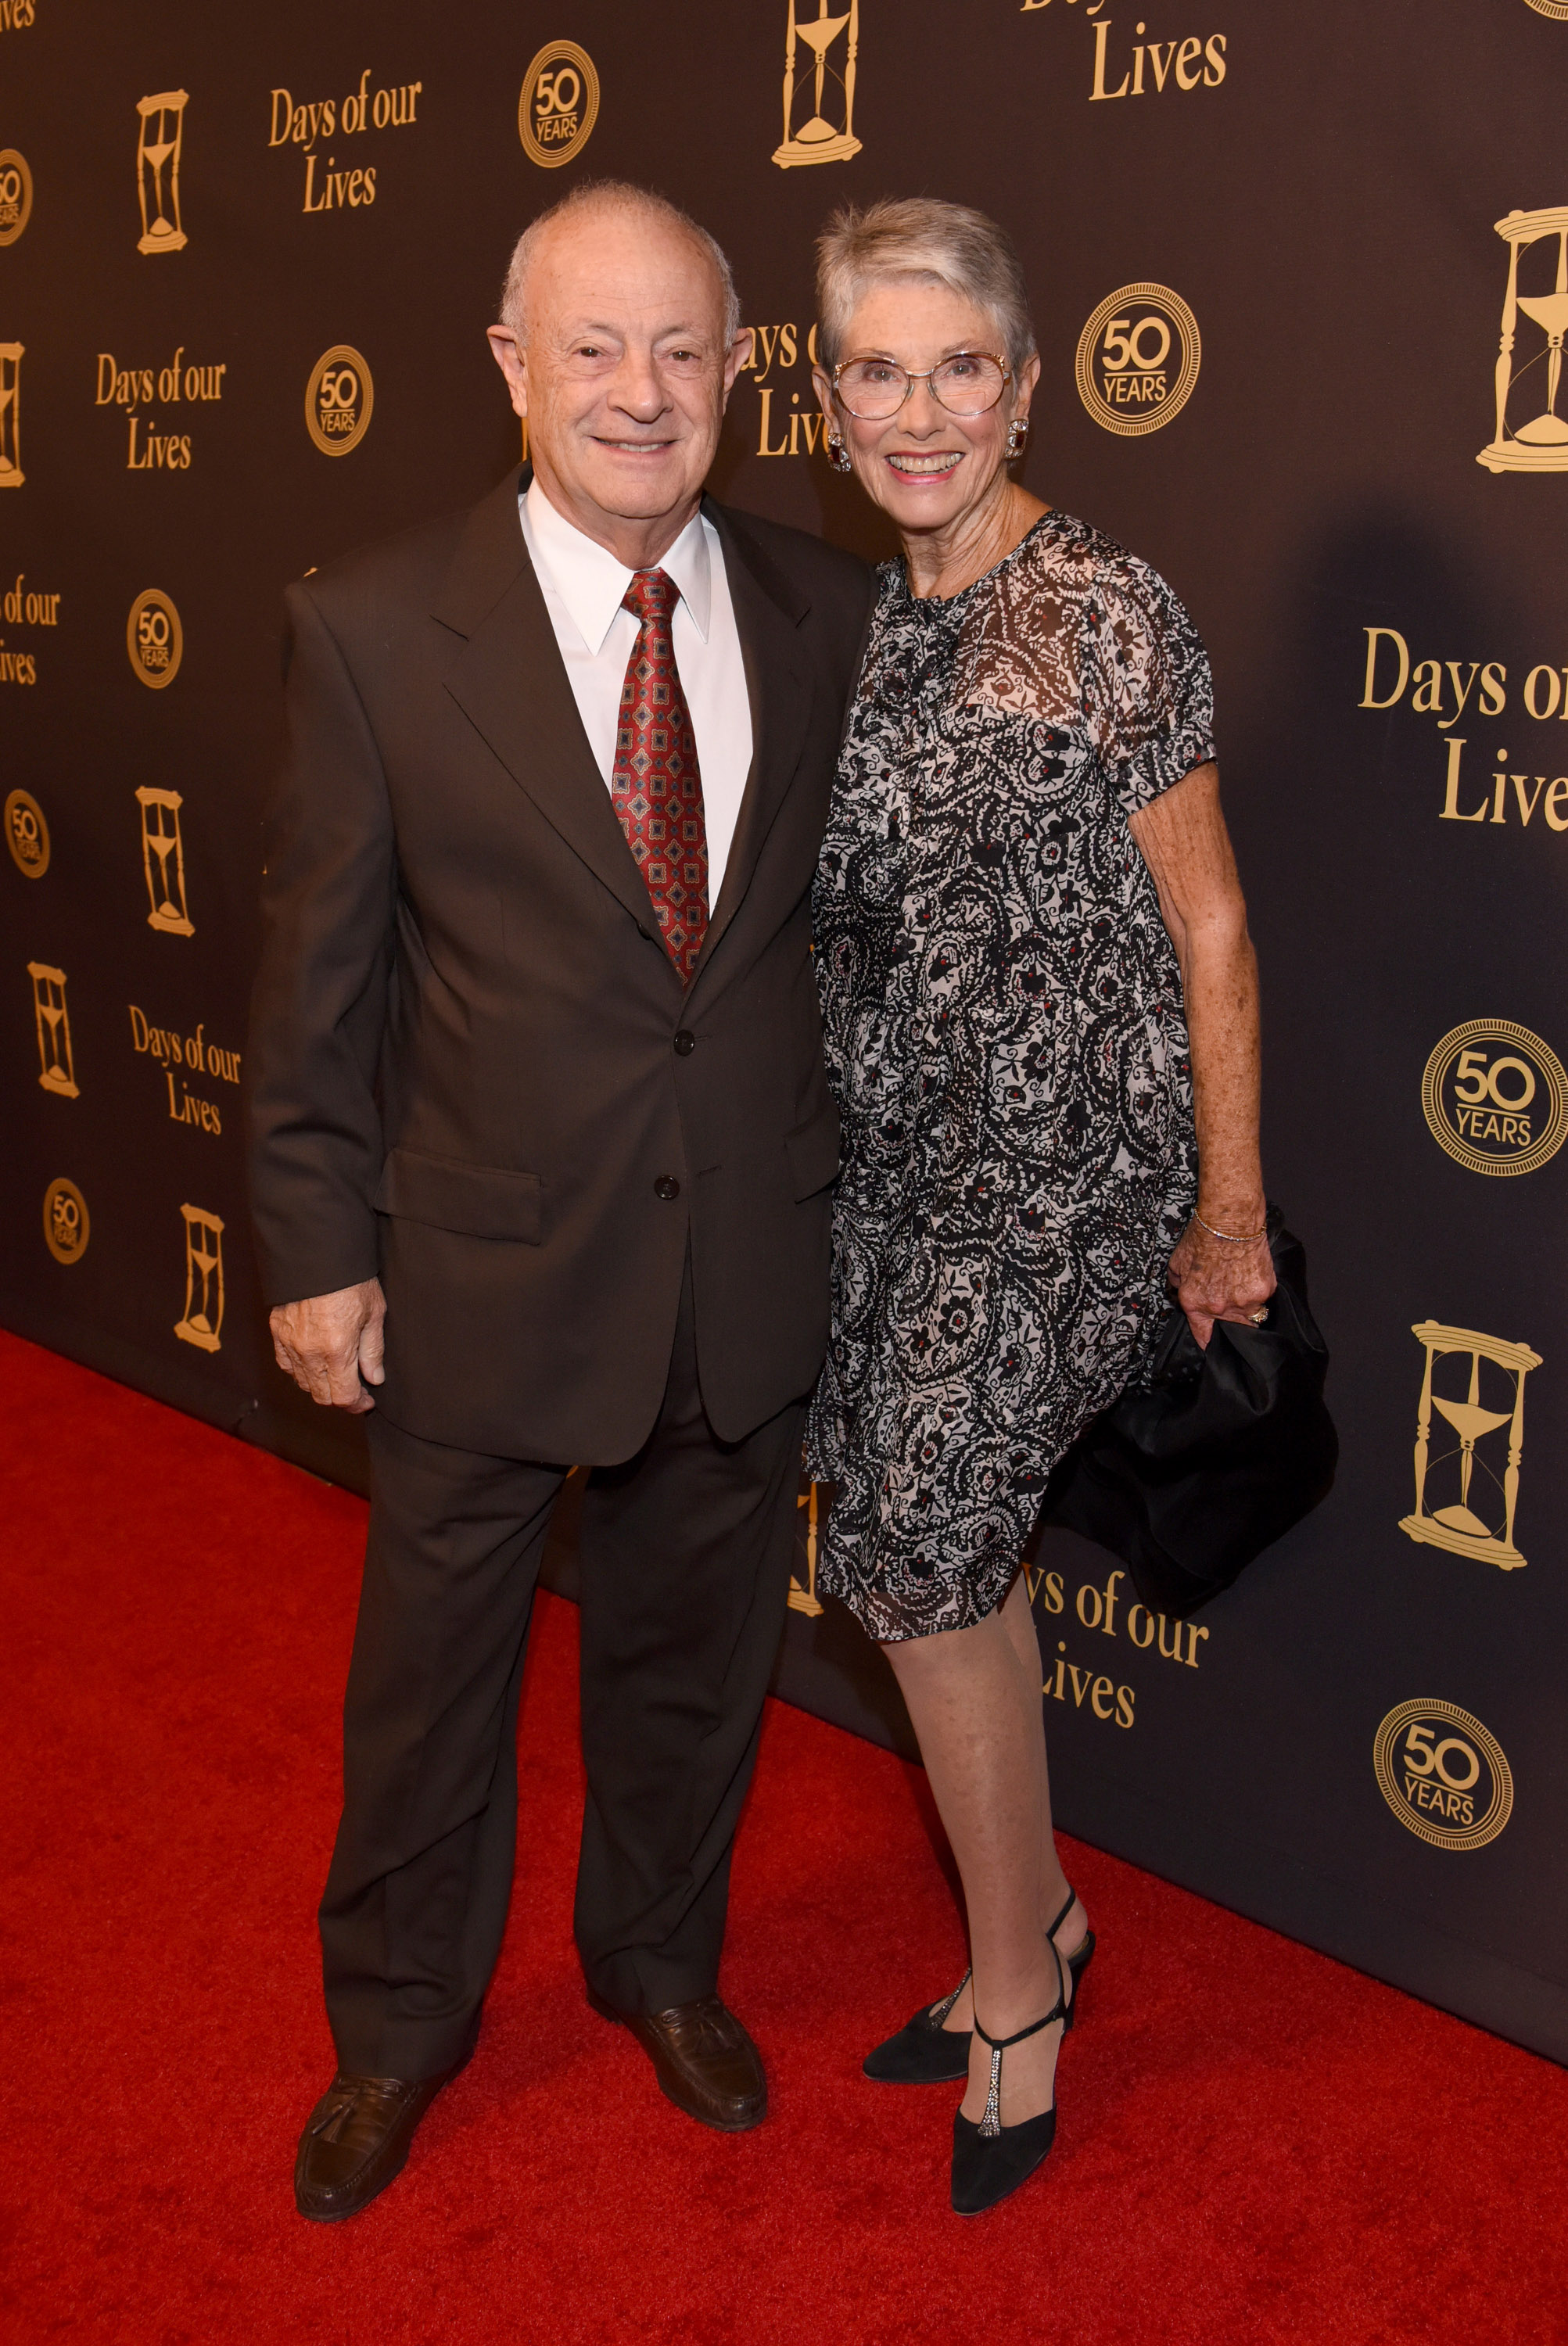 Lou Genevrino and Elinor Donahue at the Days Of Our Lives' 50th Anniversary Celebration in Hollywood in 2015 | Source: Getty Images